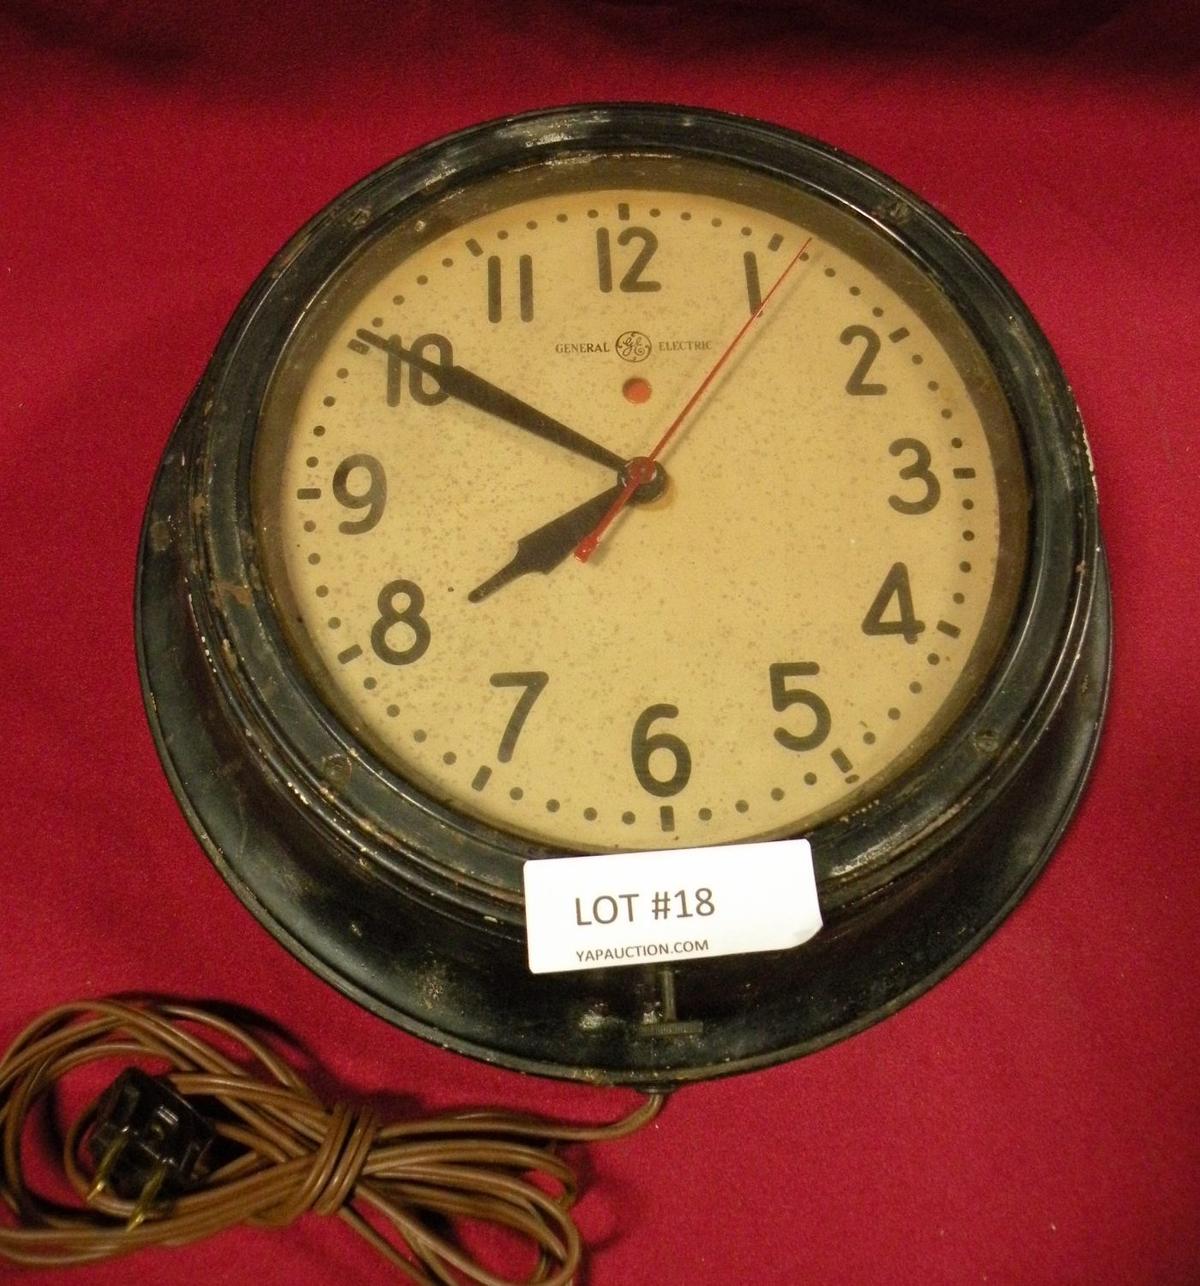 VTG. GENERAL ELECTRIC WALL CLOCK - WORKS